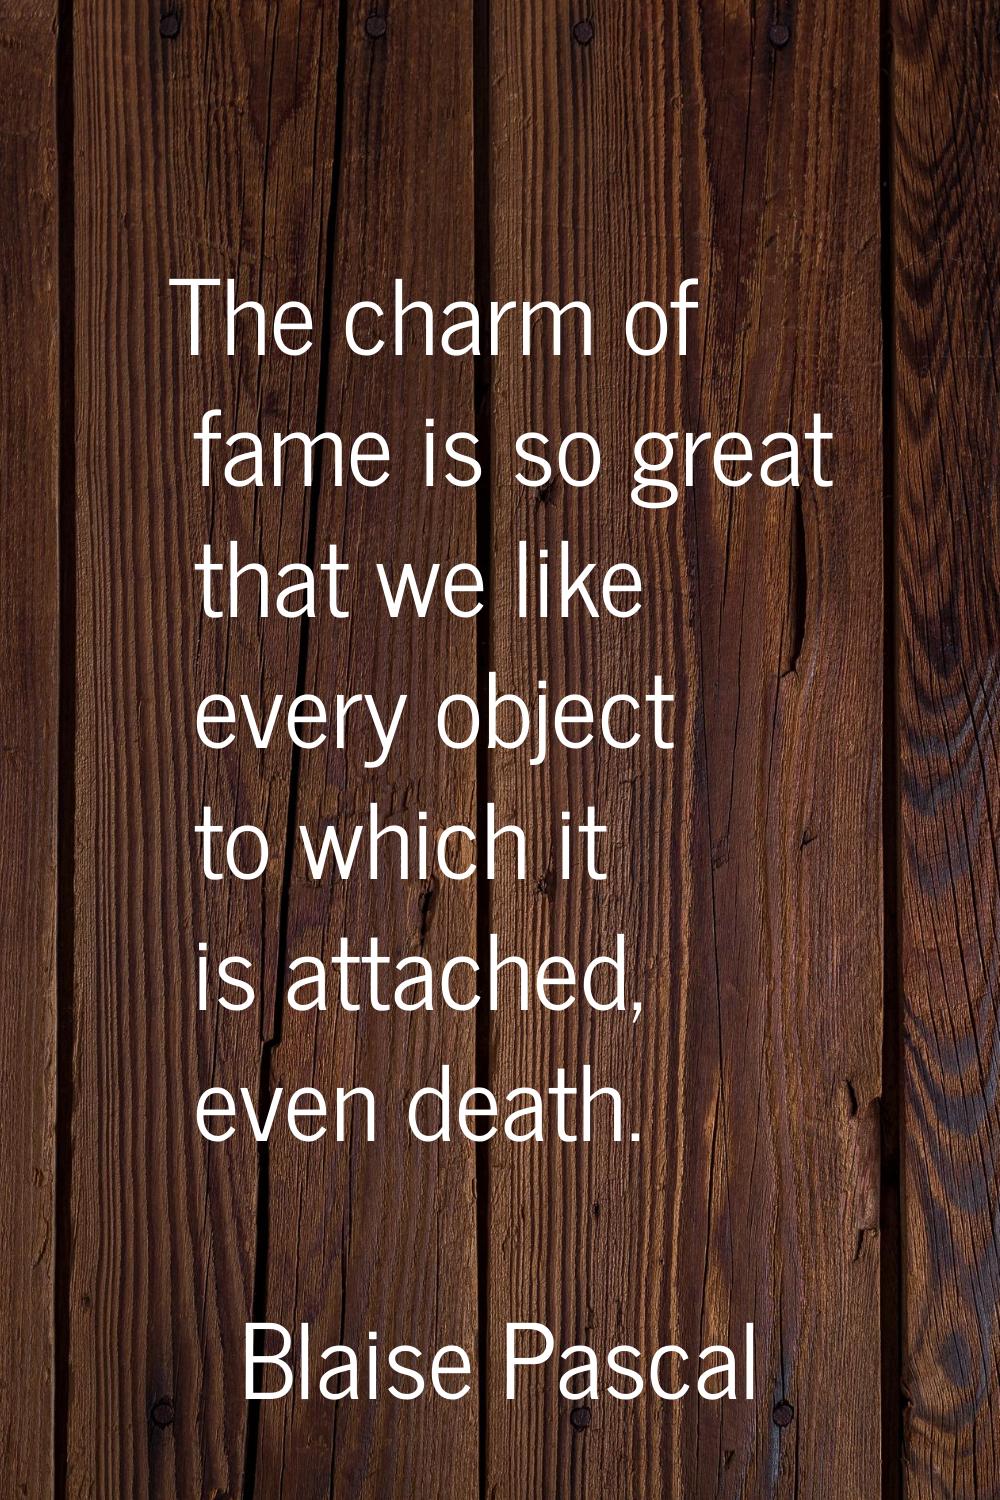 The charm of fame is so great that we like every object to which it is attached, even death.